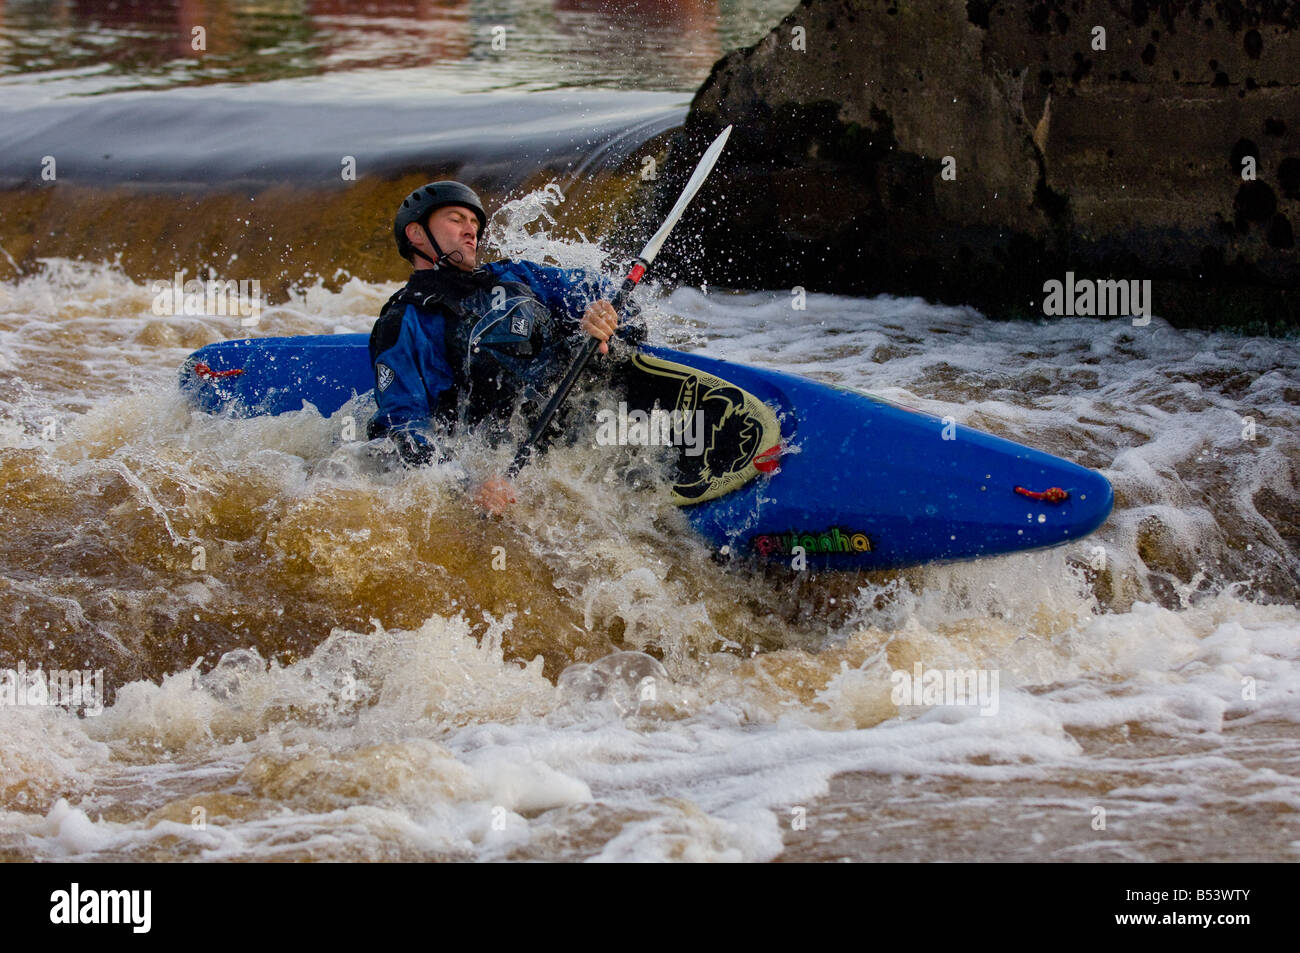 Caucasian male kayaker in a blue kayak capsizing in white water. Stock Photo